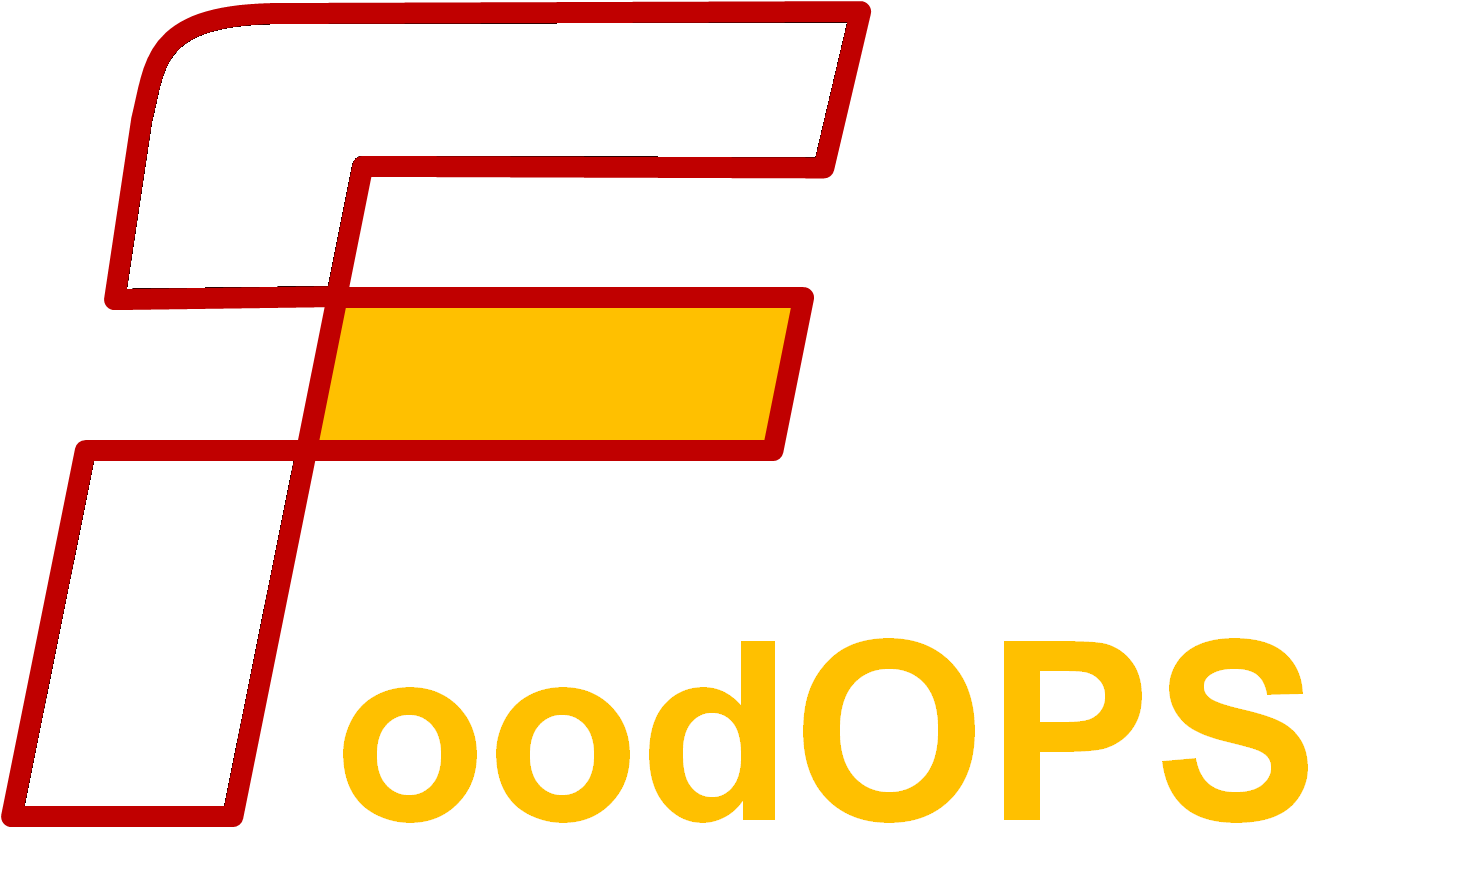 THE INTERNATIONAL FOOD OPERATIONS AND PROCESSING SIMULATION WORKSHOP (FOODOPS 2018)